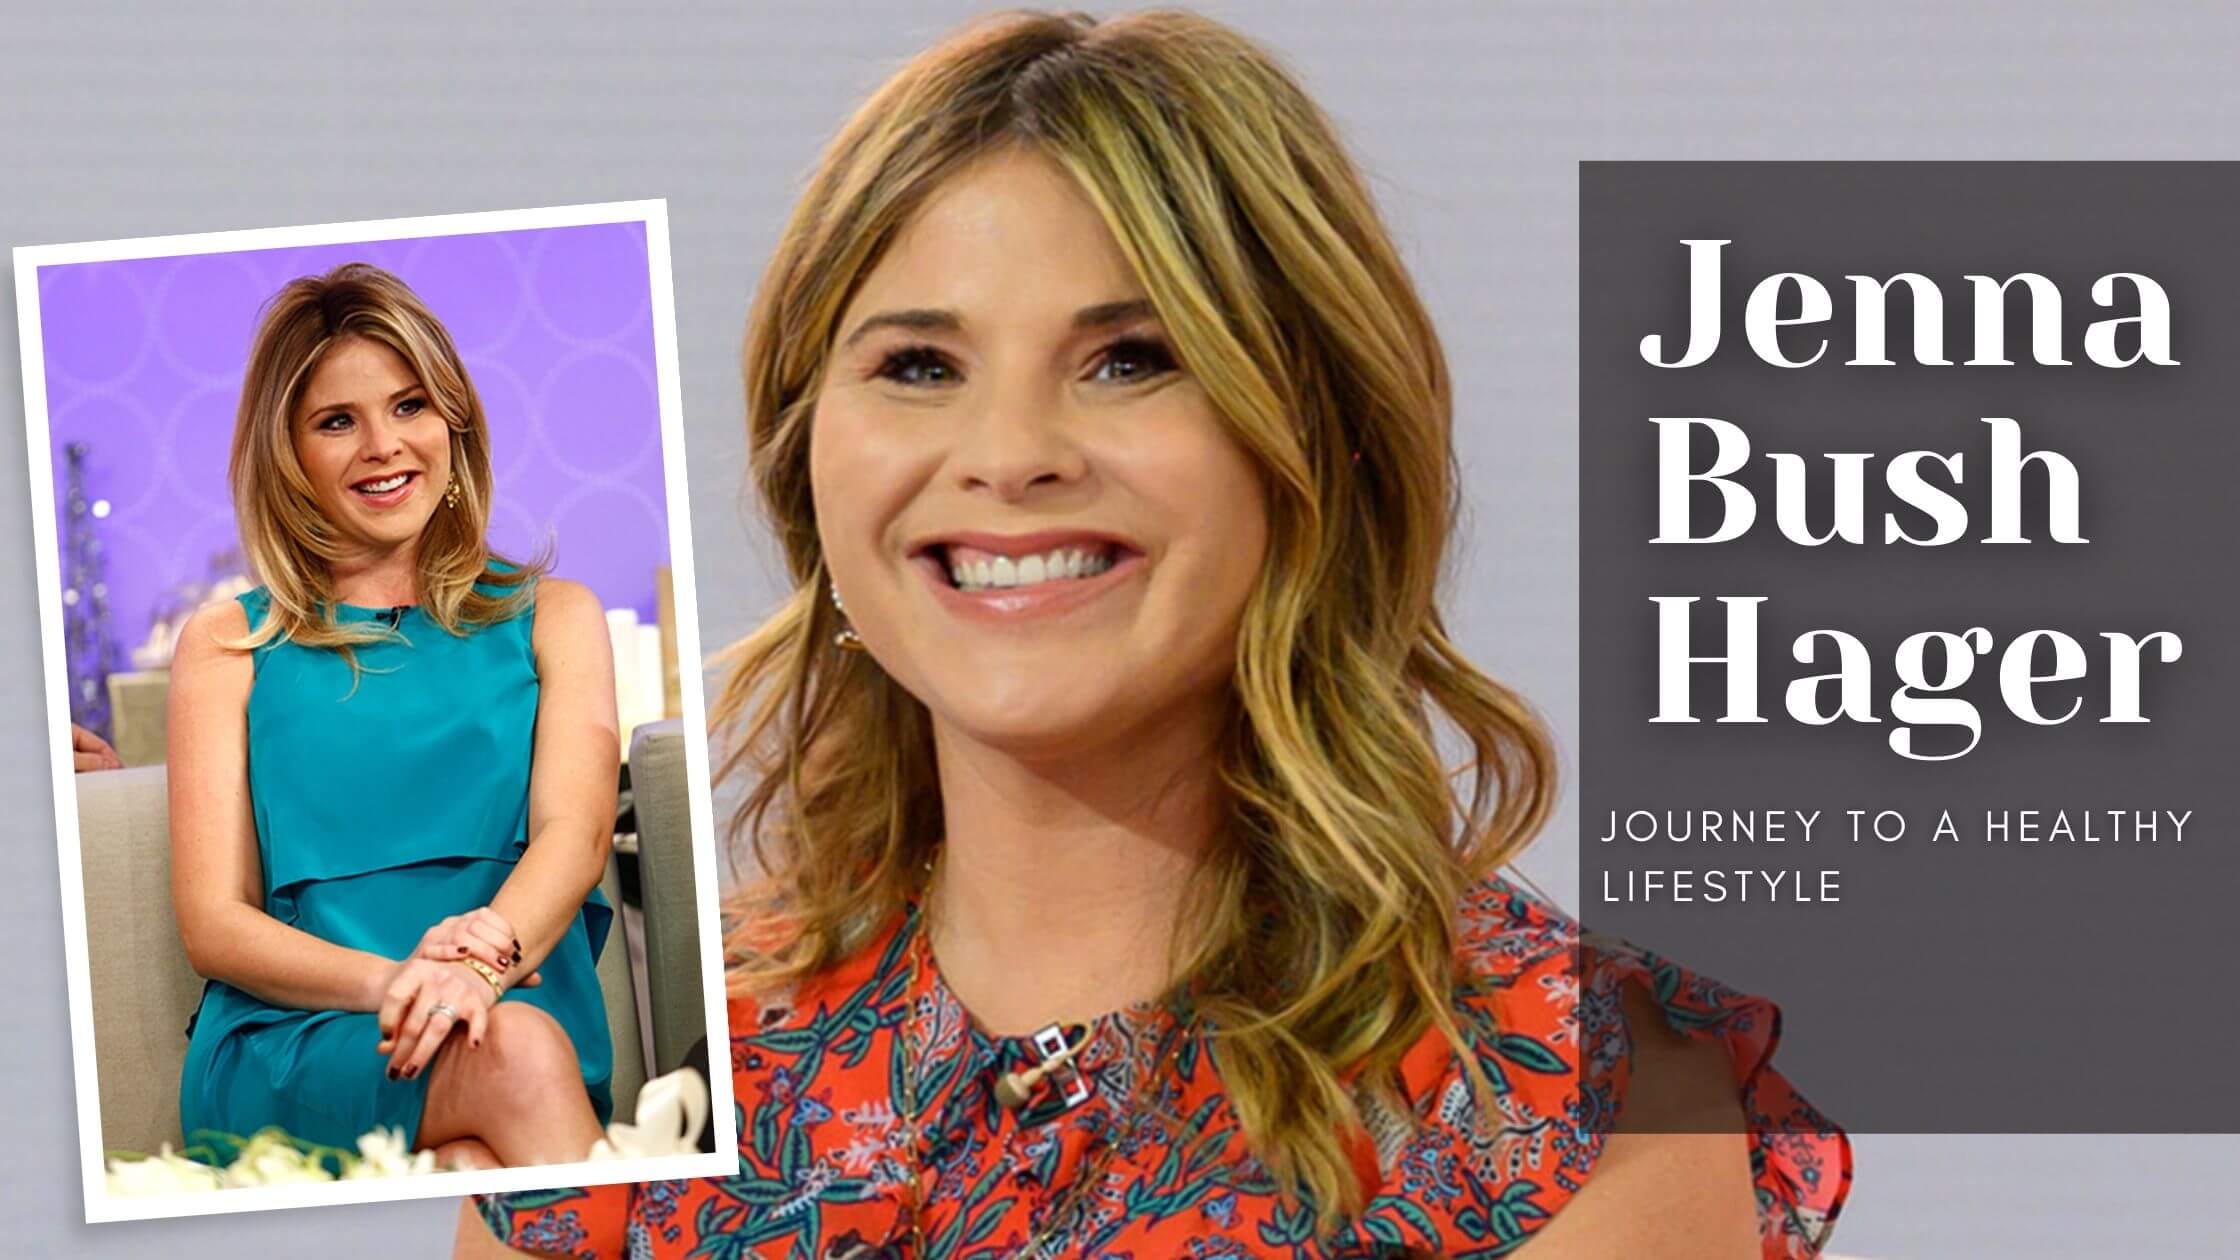 The Journey of Jenna Bush Hager to a Healthier Lifestyle